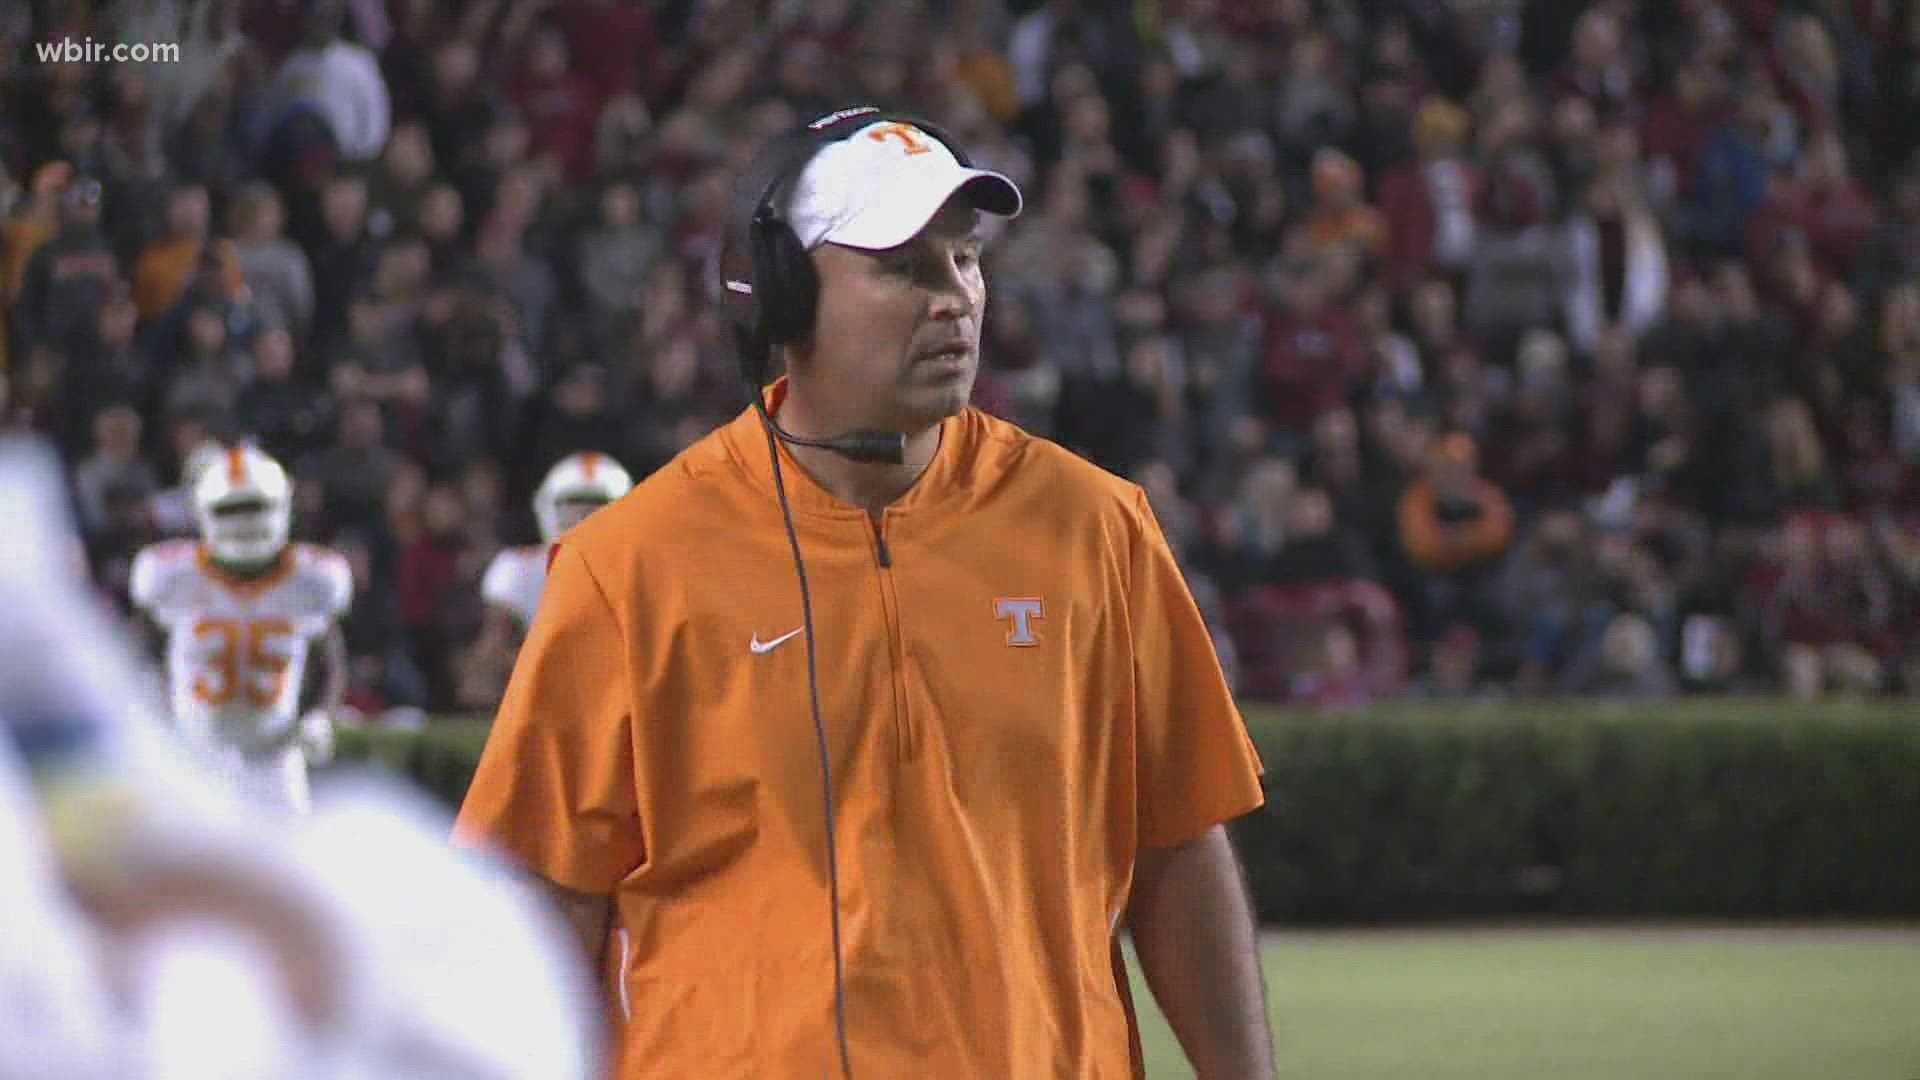 The Vols fired former coach Jeremy Pruitt and two assistant coaches, as well as several staffers, over alleged football recruiting violations.